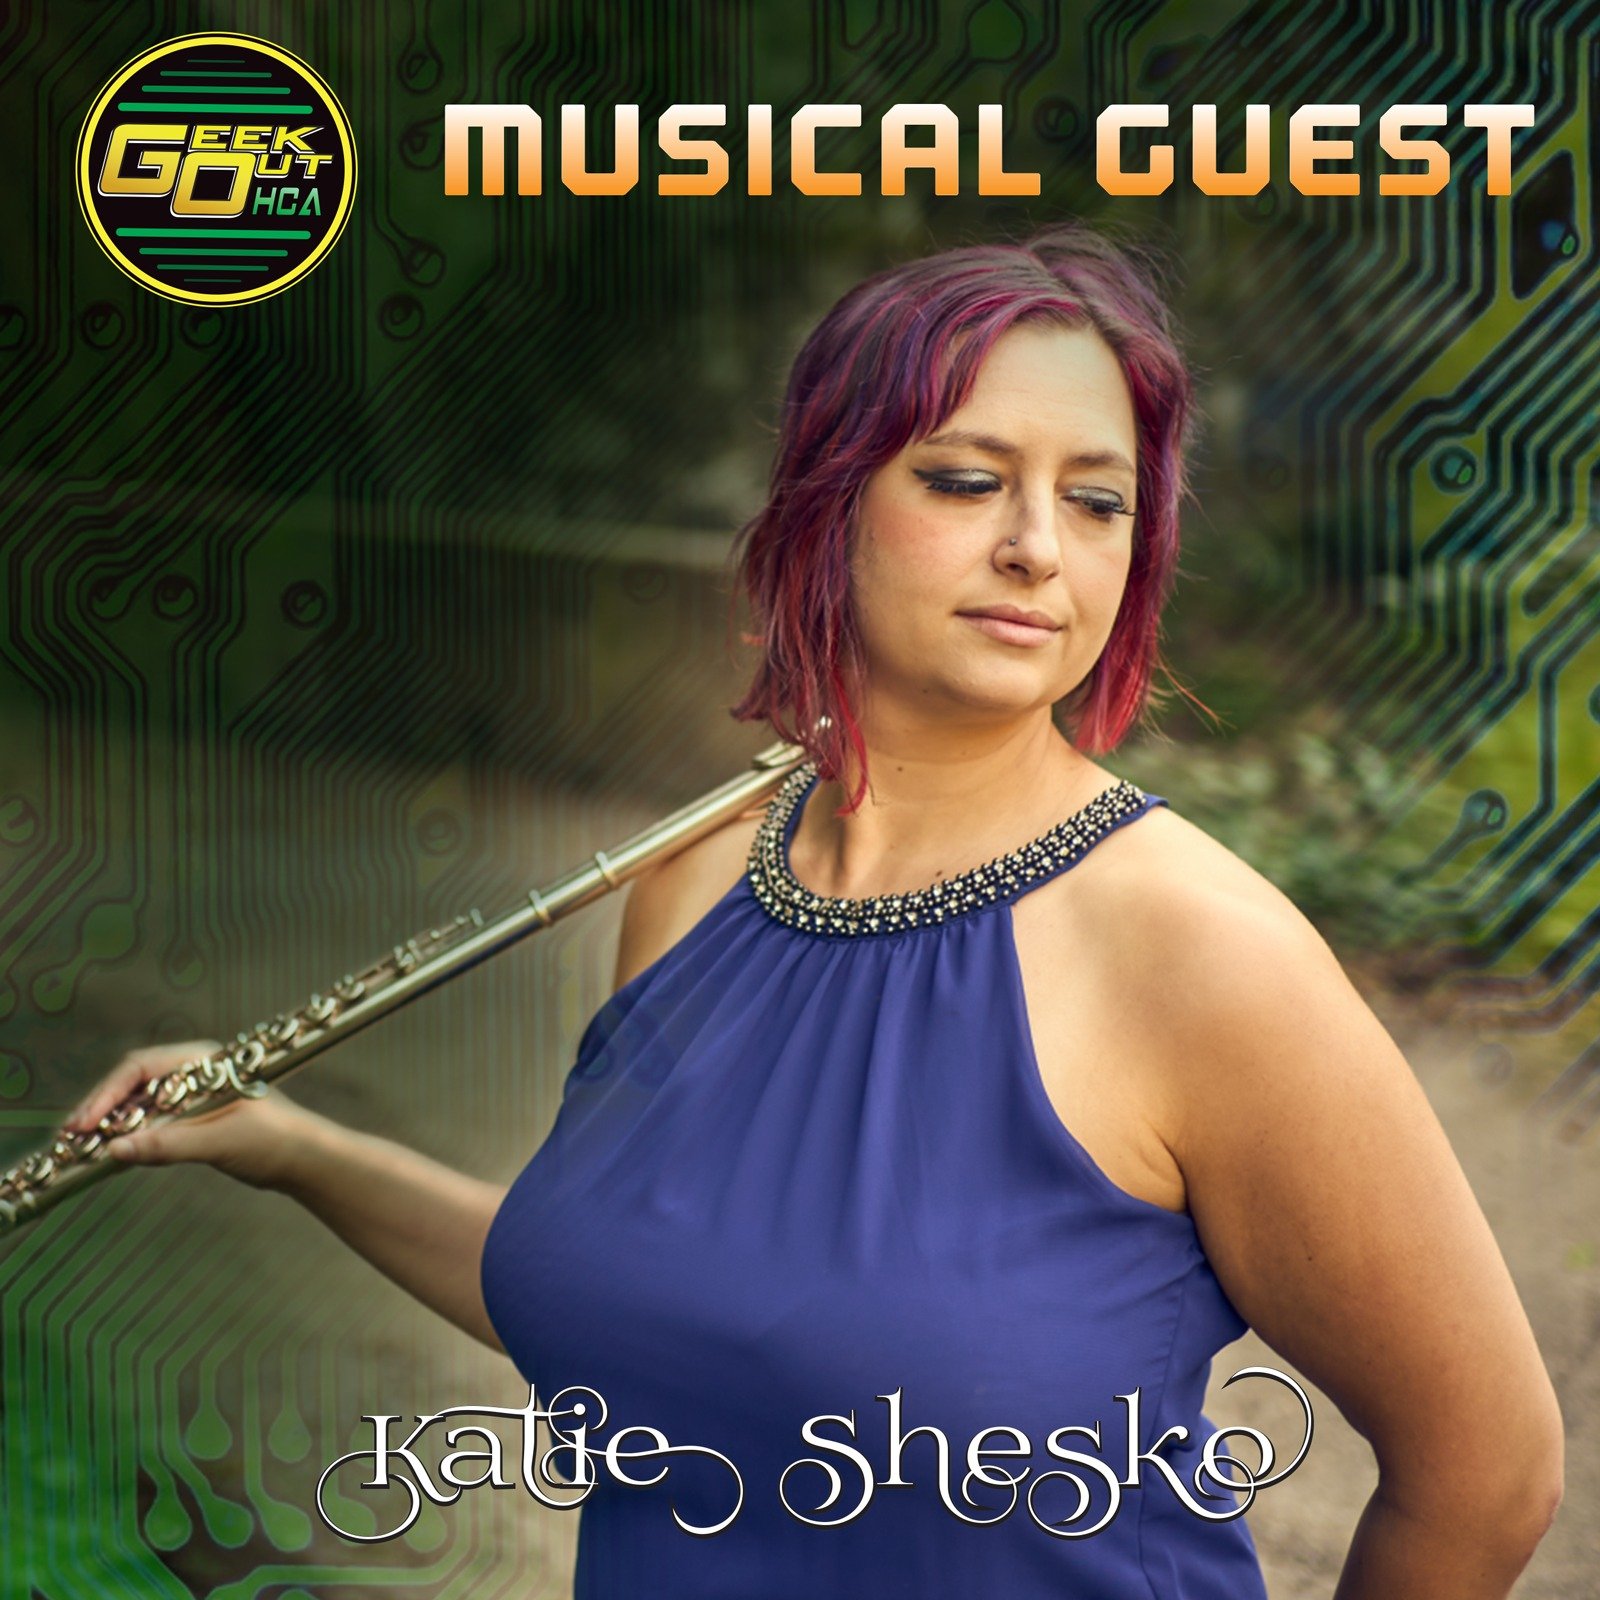   Join us in welcoming the talented Katie Shesko!    Katie Shesko is a multifaceted artist, renowned for her exceptional talents as a flutist and her dedication as a speedrunner. She plays captivating renditions of video game and anime music, through